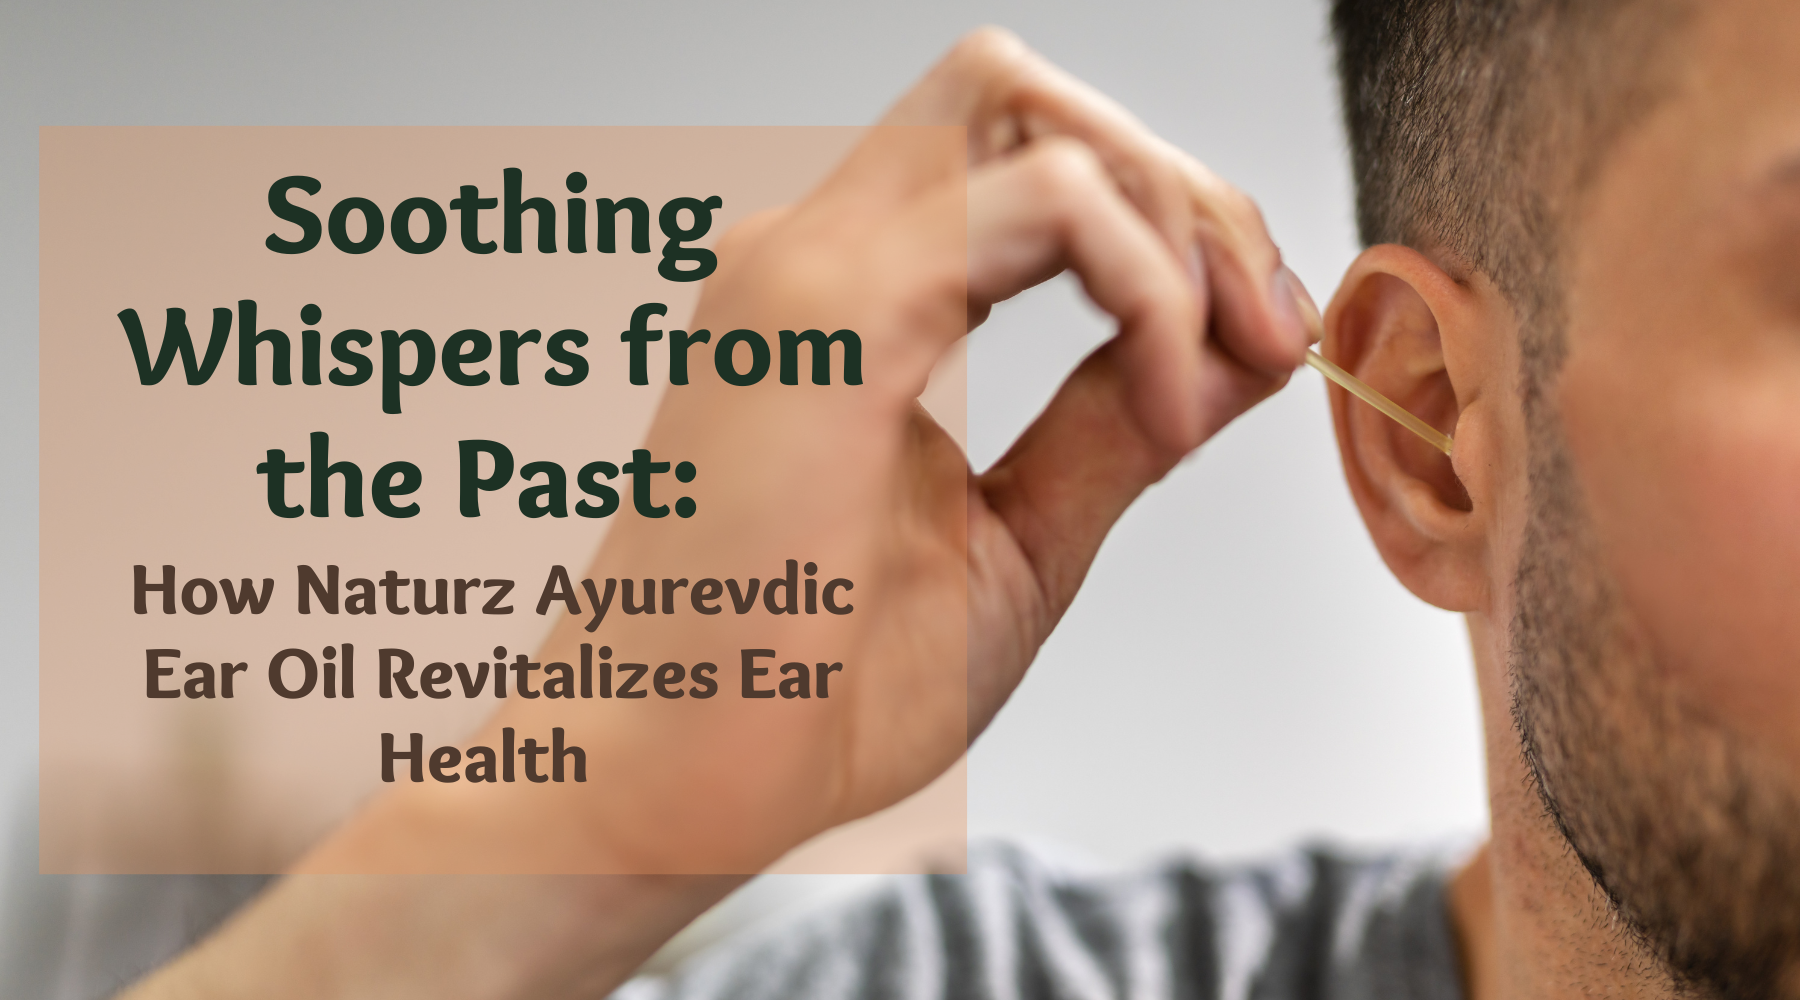 Soothing Whispers from the Past: How Naturz Ayurevdic Ear Oil Revitalizes Ear Health